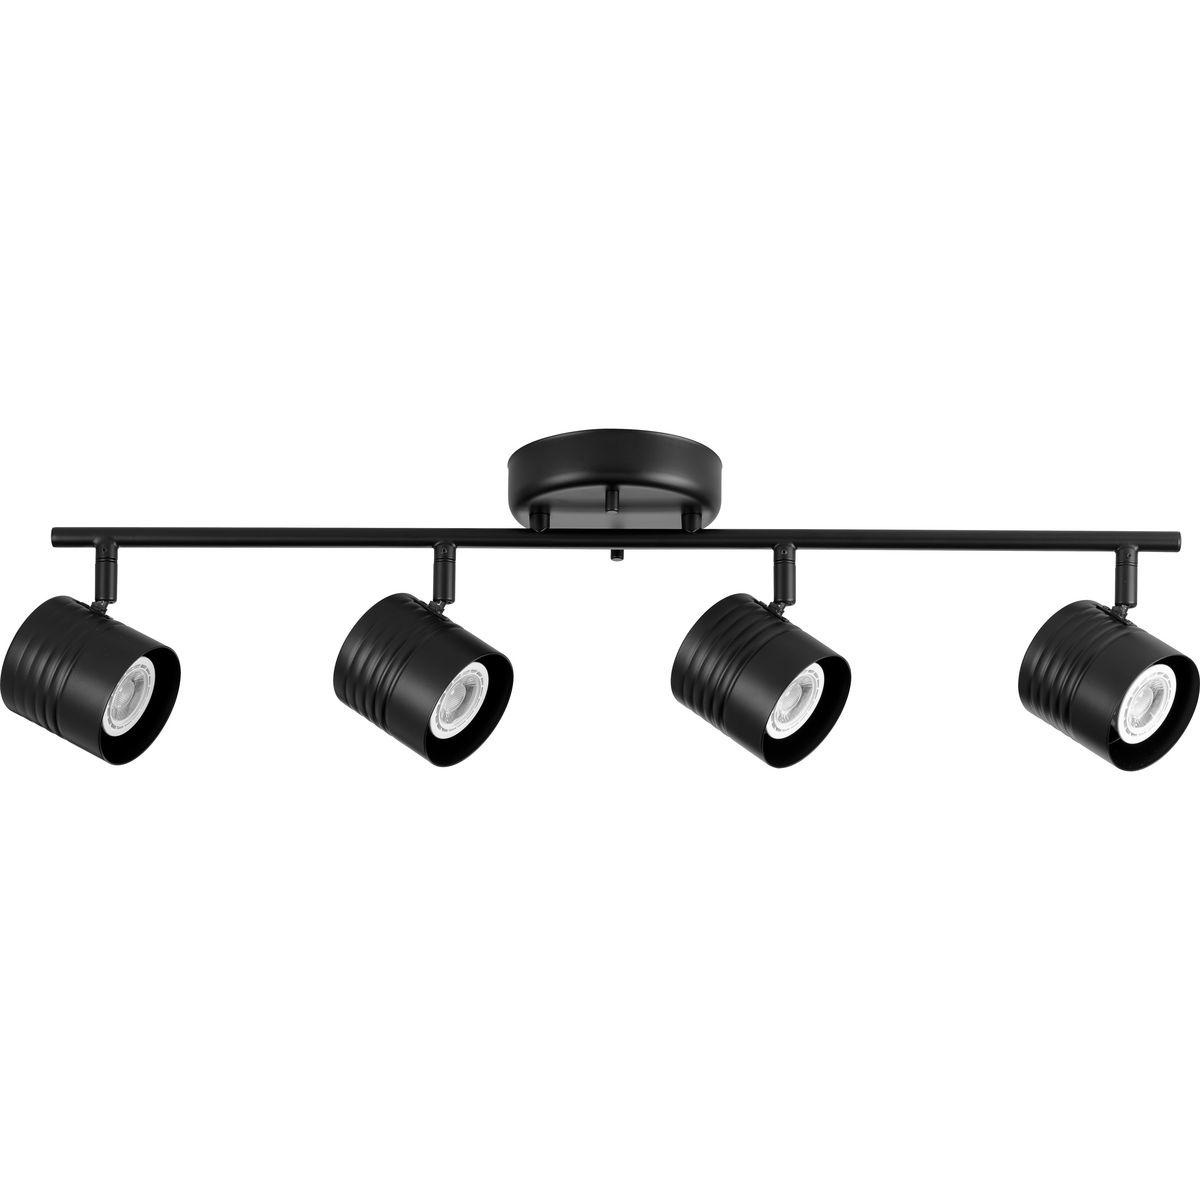 Hubbell P900014-031 Incorporate a hint of stylish industrial light to any commercial or residential setting with this brushed nickel four-head track metal directional light fixture. Multi-directional lamp heads provide design flexibility and illuminate typically hard-to-reac